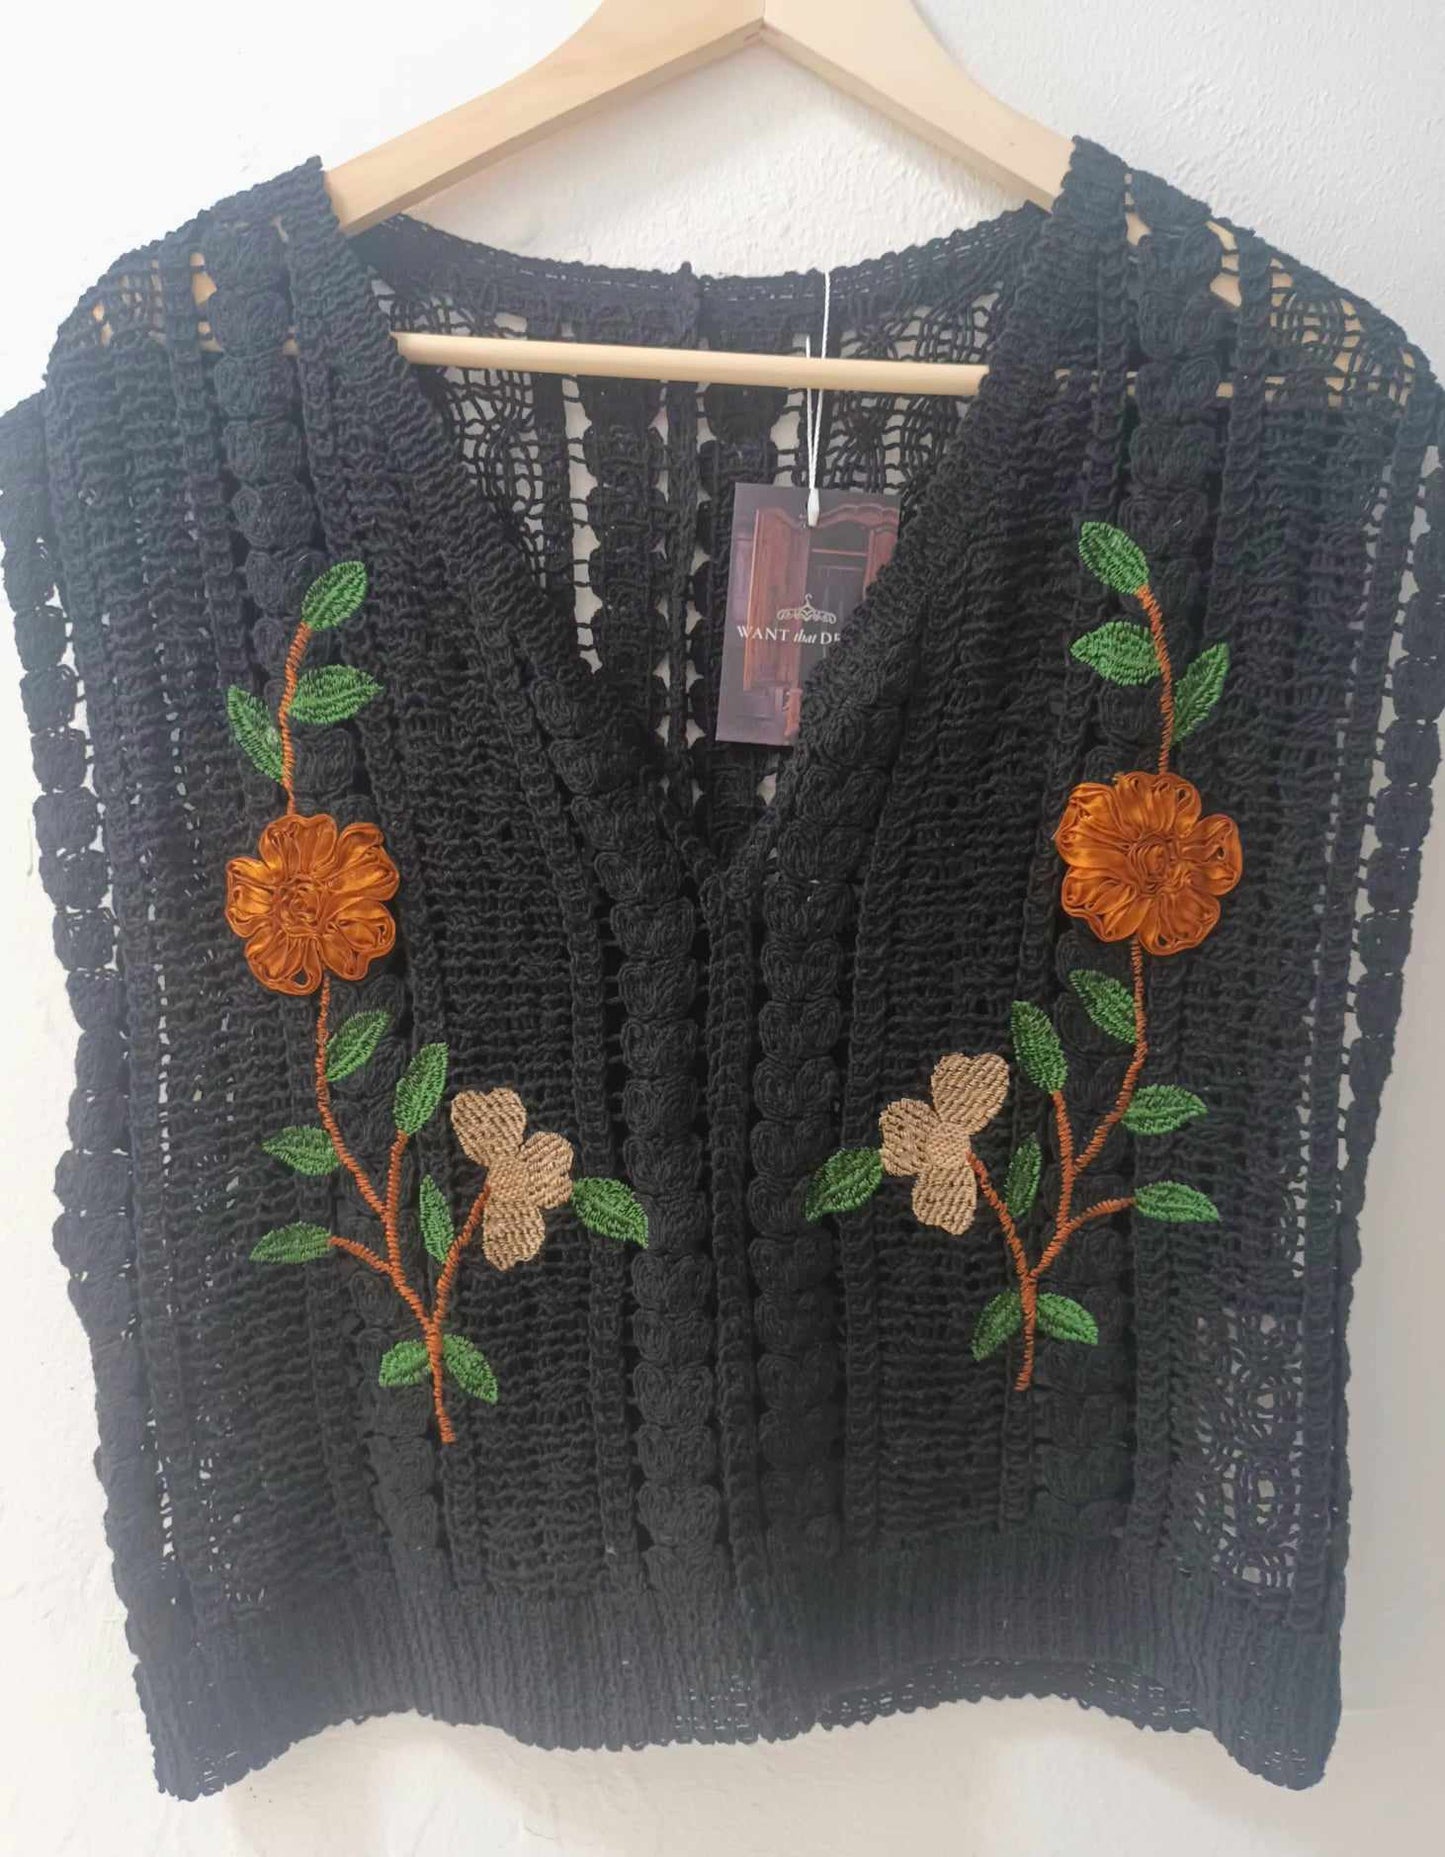 'TOPSY' VINTAGE STYLE CROCHET TANK TOP WITH APPLIQUE AND EMBROIDERED DETAIL BLACK OR CREAM